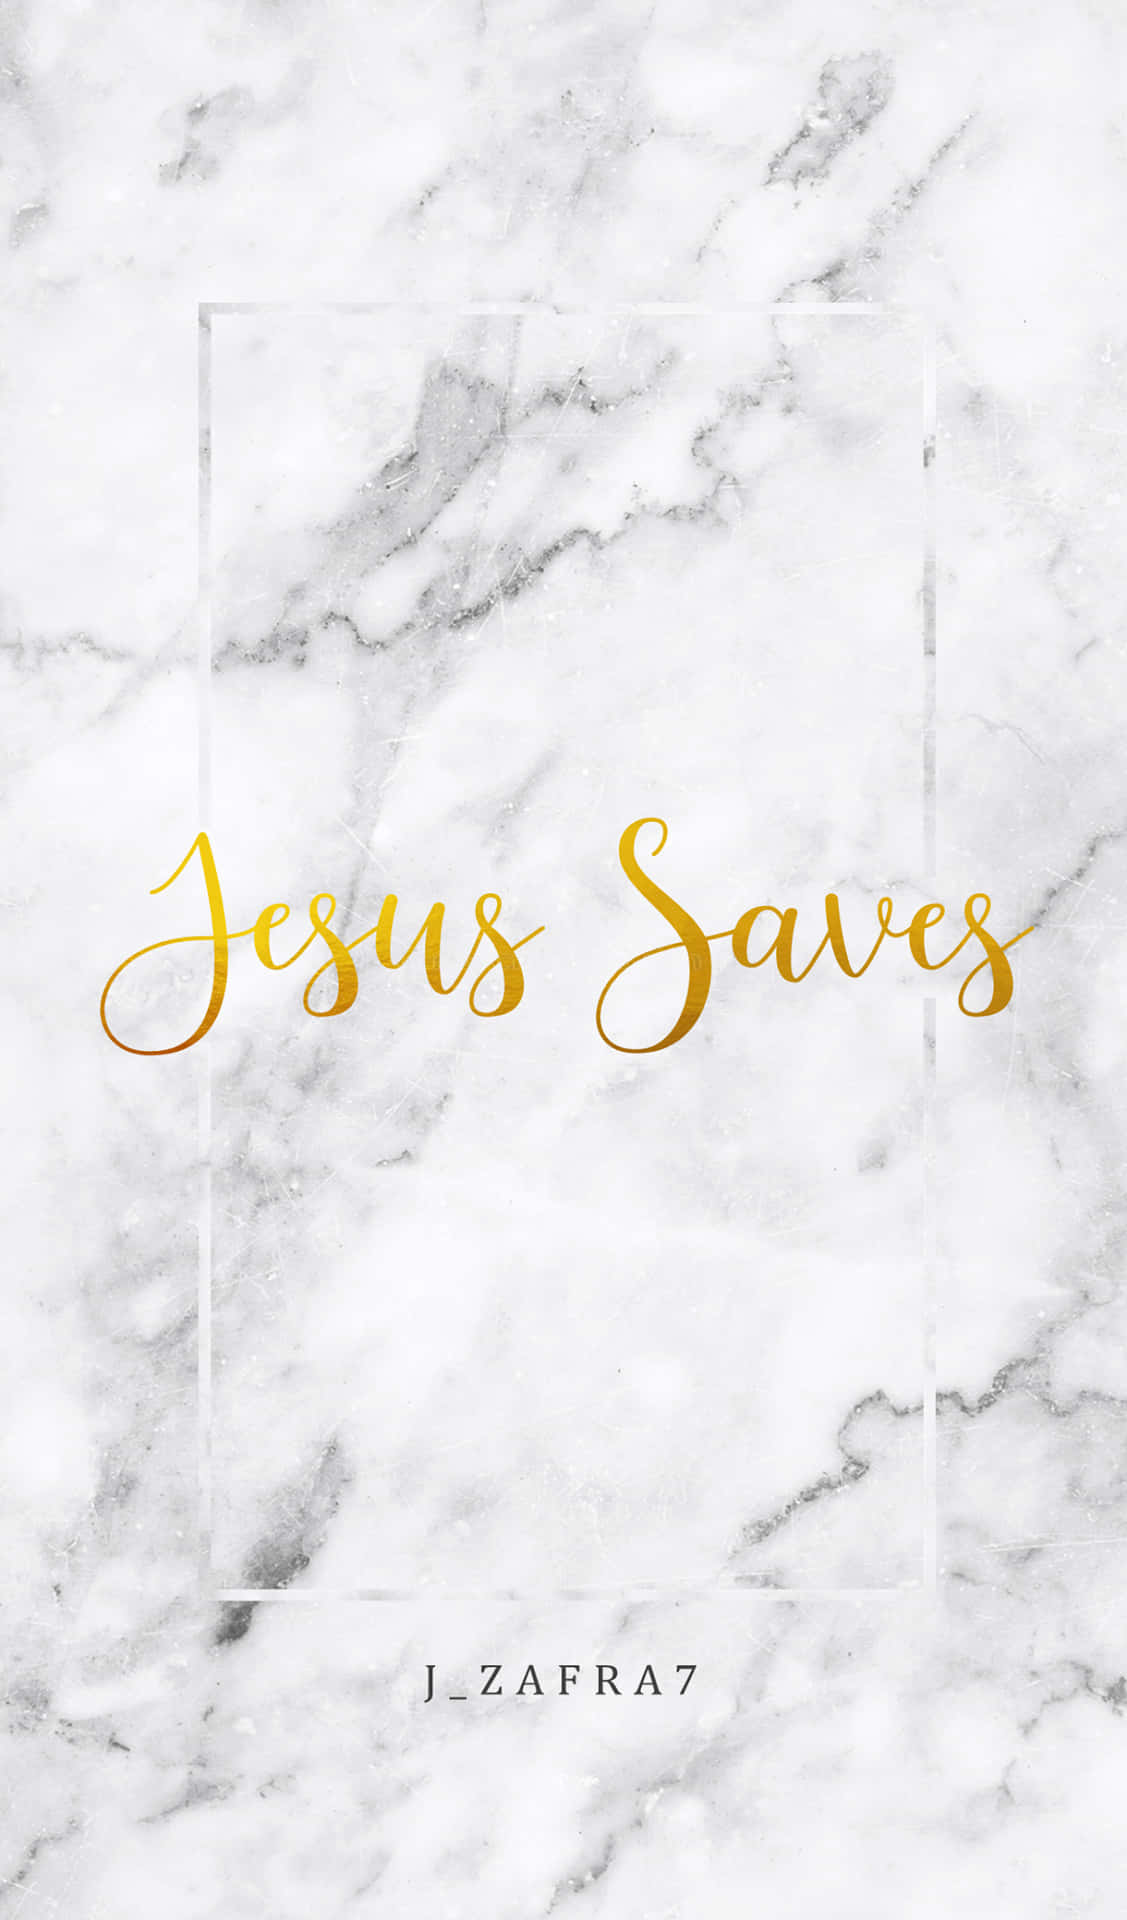 Download Believe in Jesus and He will Save You Wallpaper  Wallpaperscom